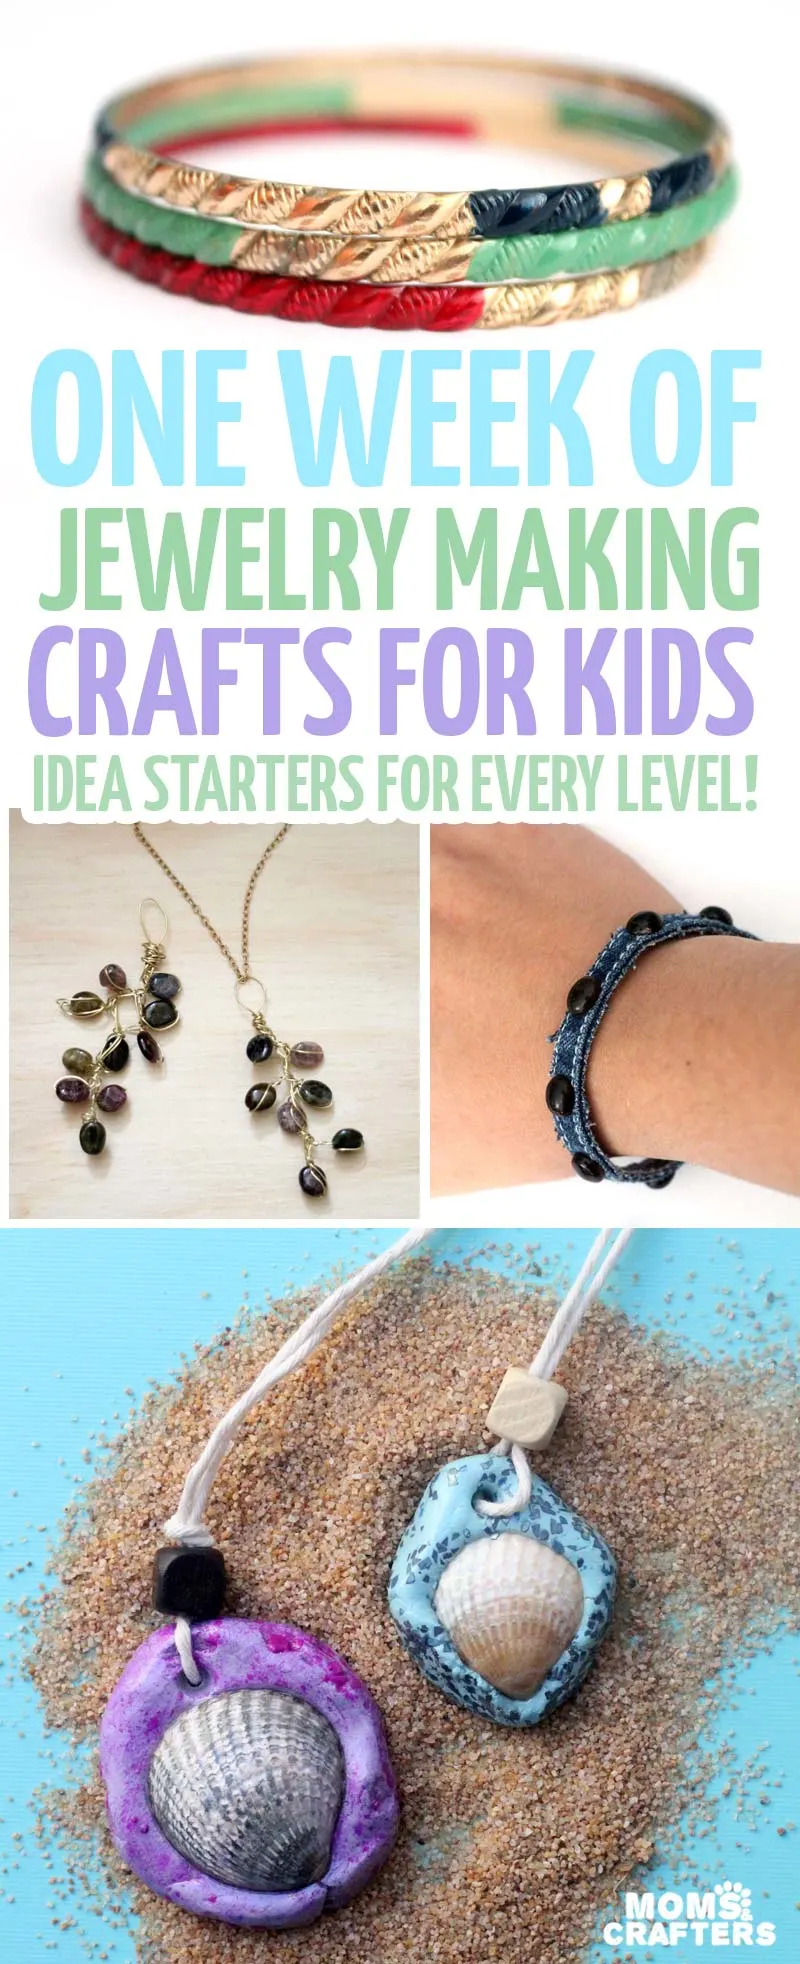 I hope you enjoy this one week of jewelry making crafts for kids - tons of jewelry making ideas for beginners and idea starters for jewelry crafters on any level = including beginners!